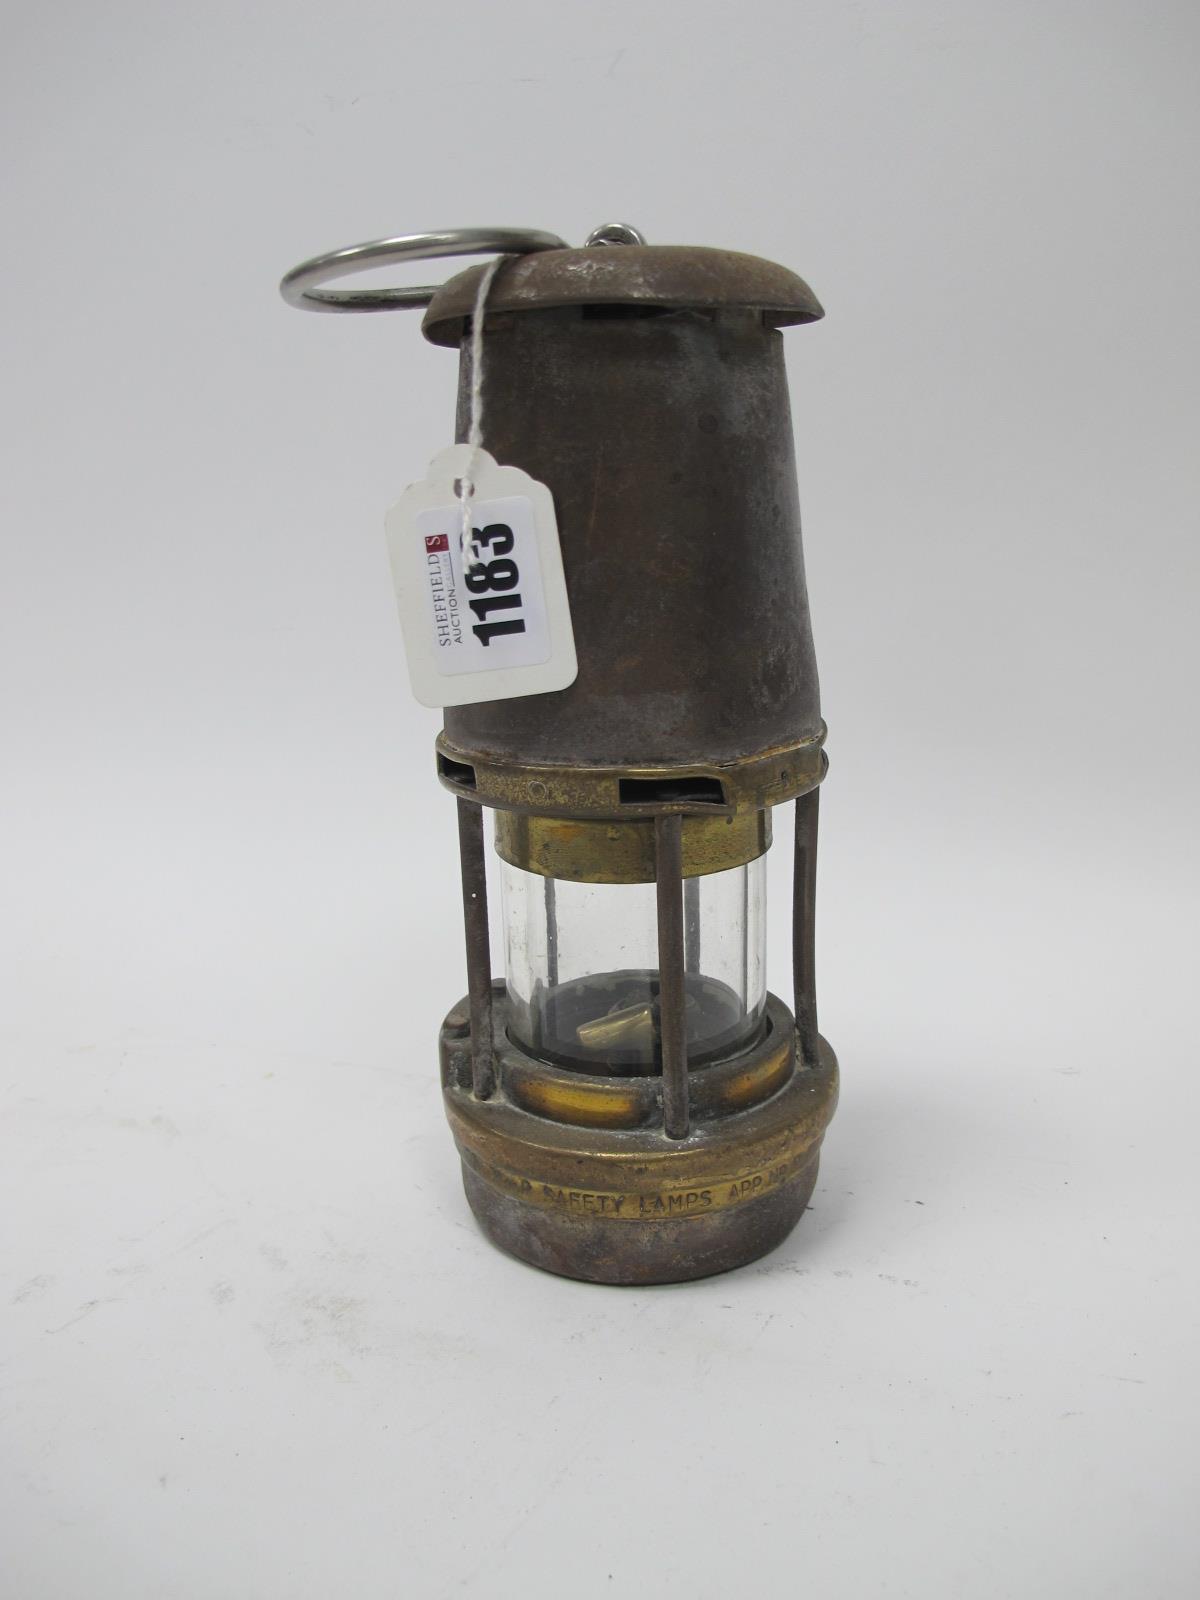 Miners Lamp, Wolf Type FG, App No B2/222 'TH' to plaque on top, 21cm high with handle down.